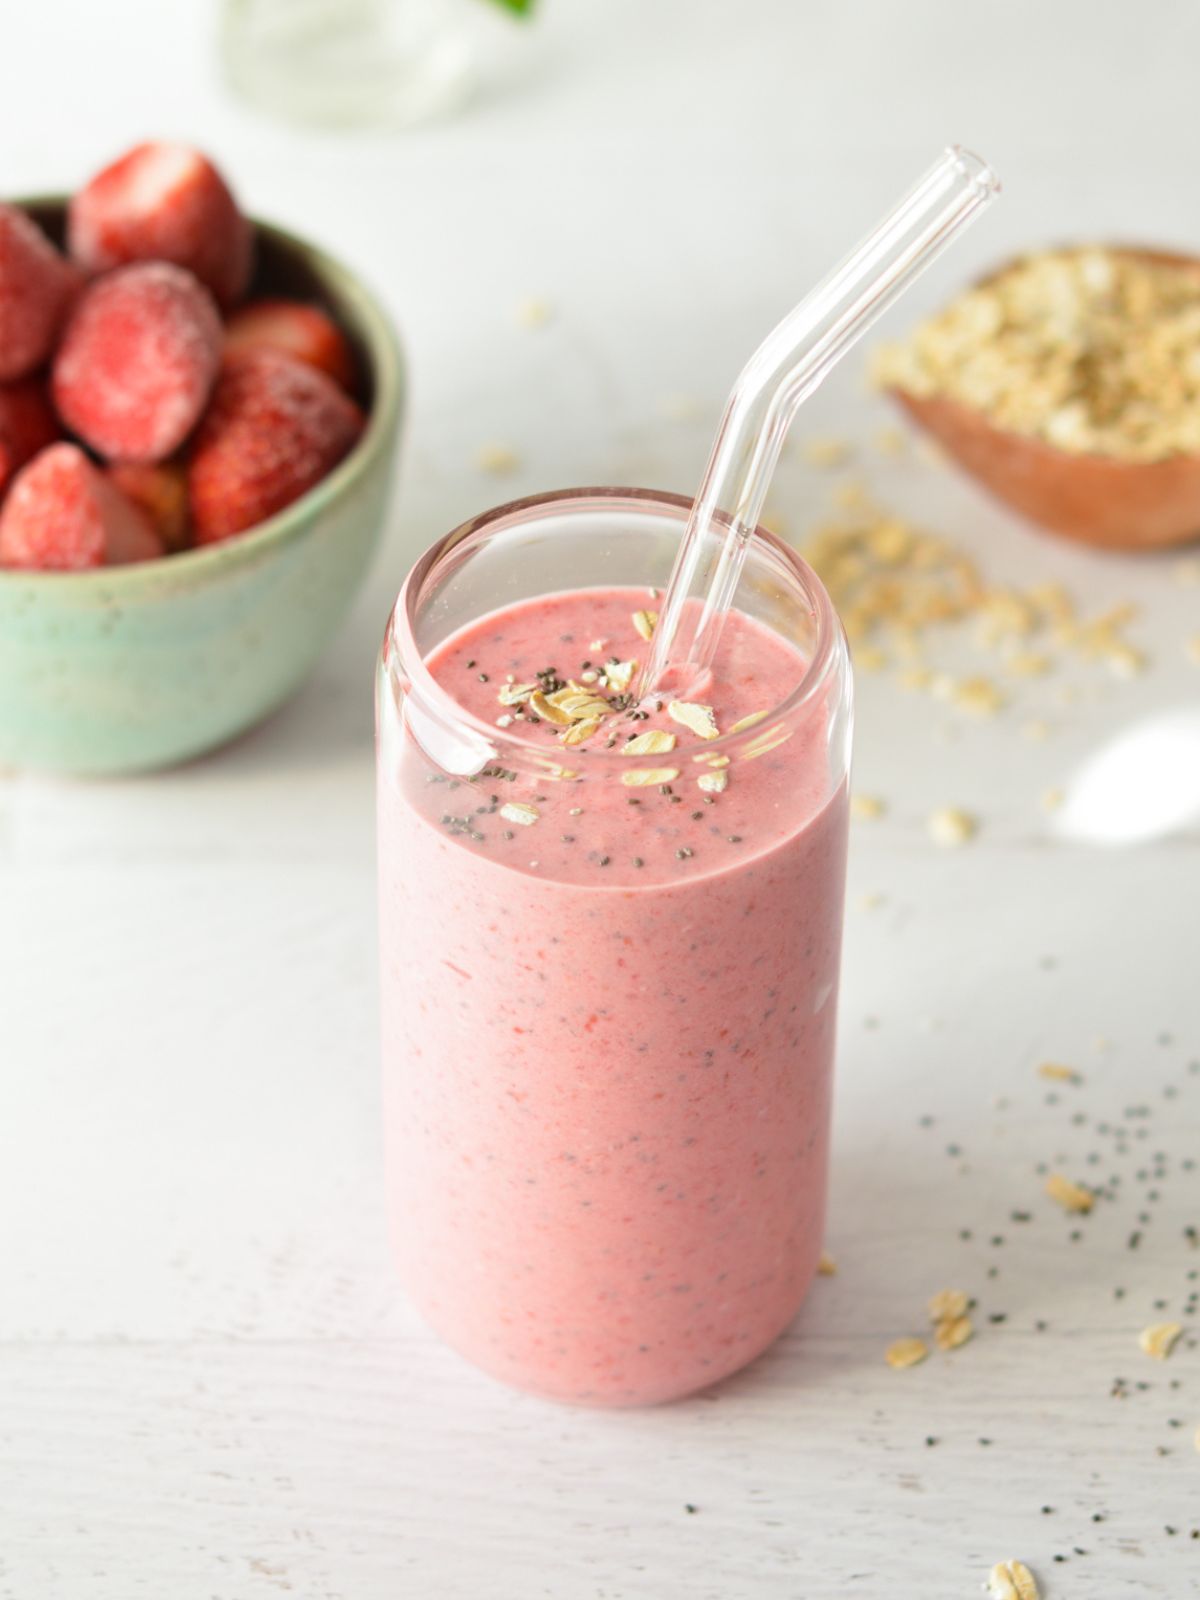 a raspberry smoothie with oats and chia seeds.